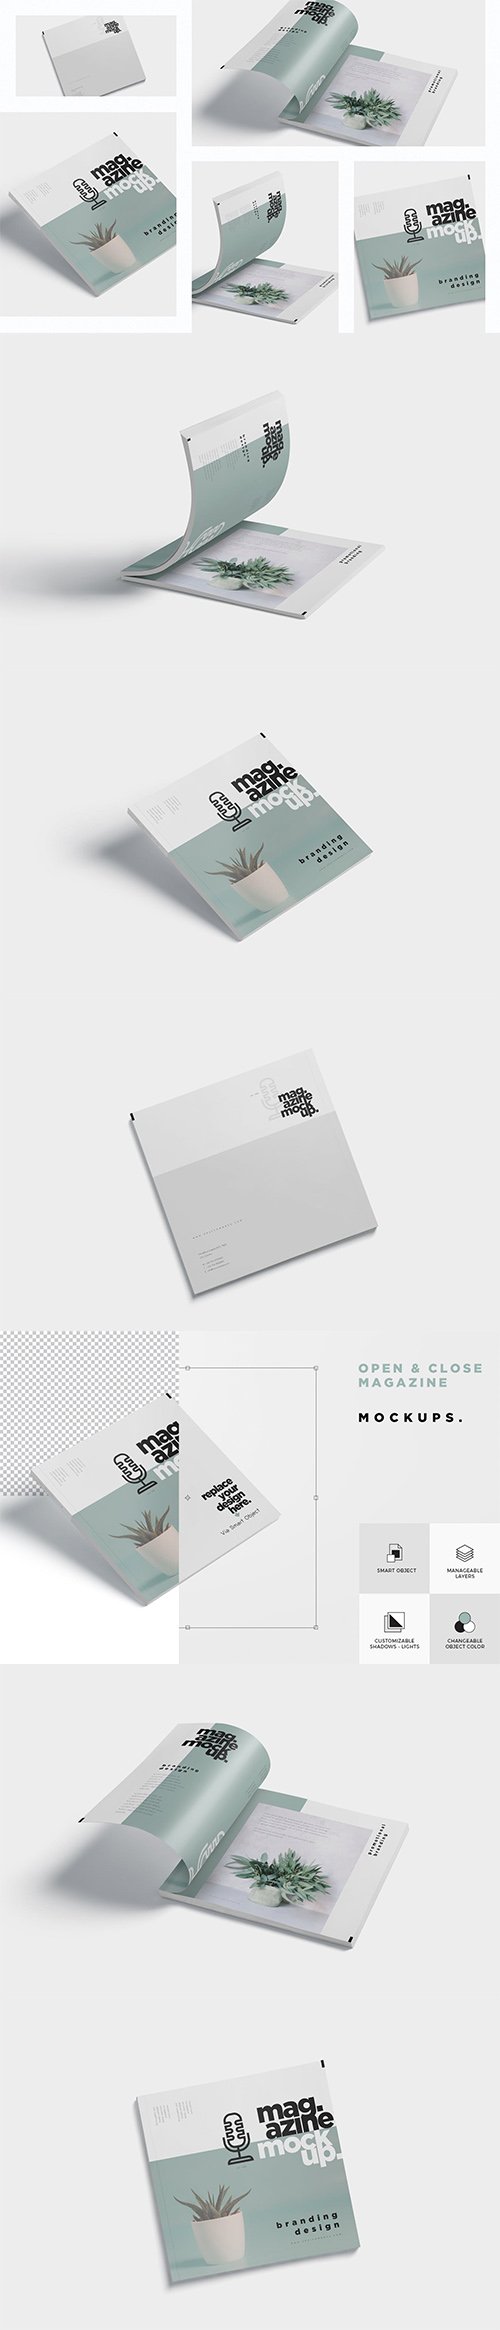 Open and Close Magazine Mockups PSD